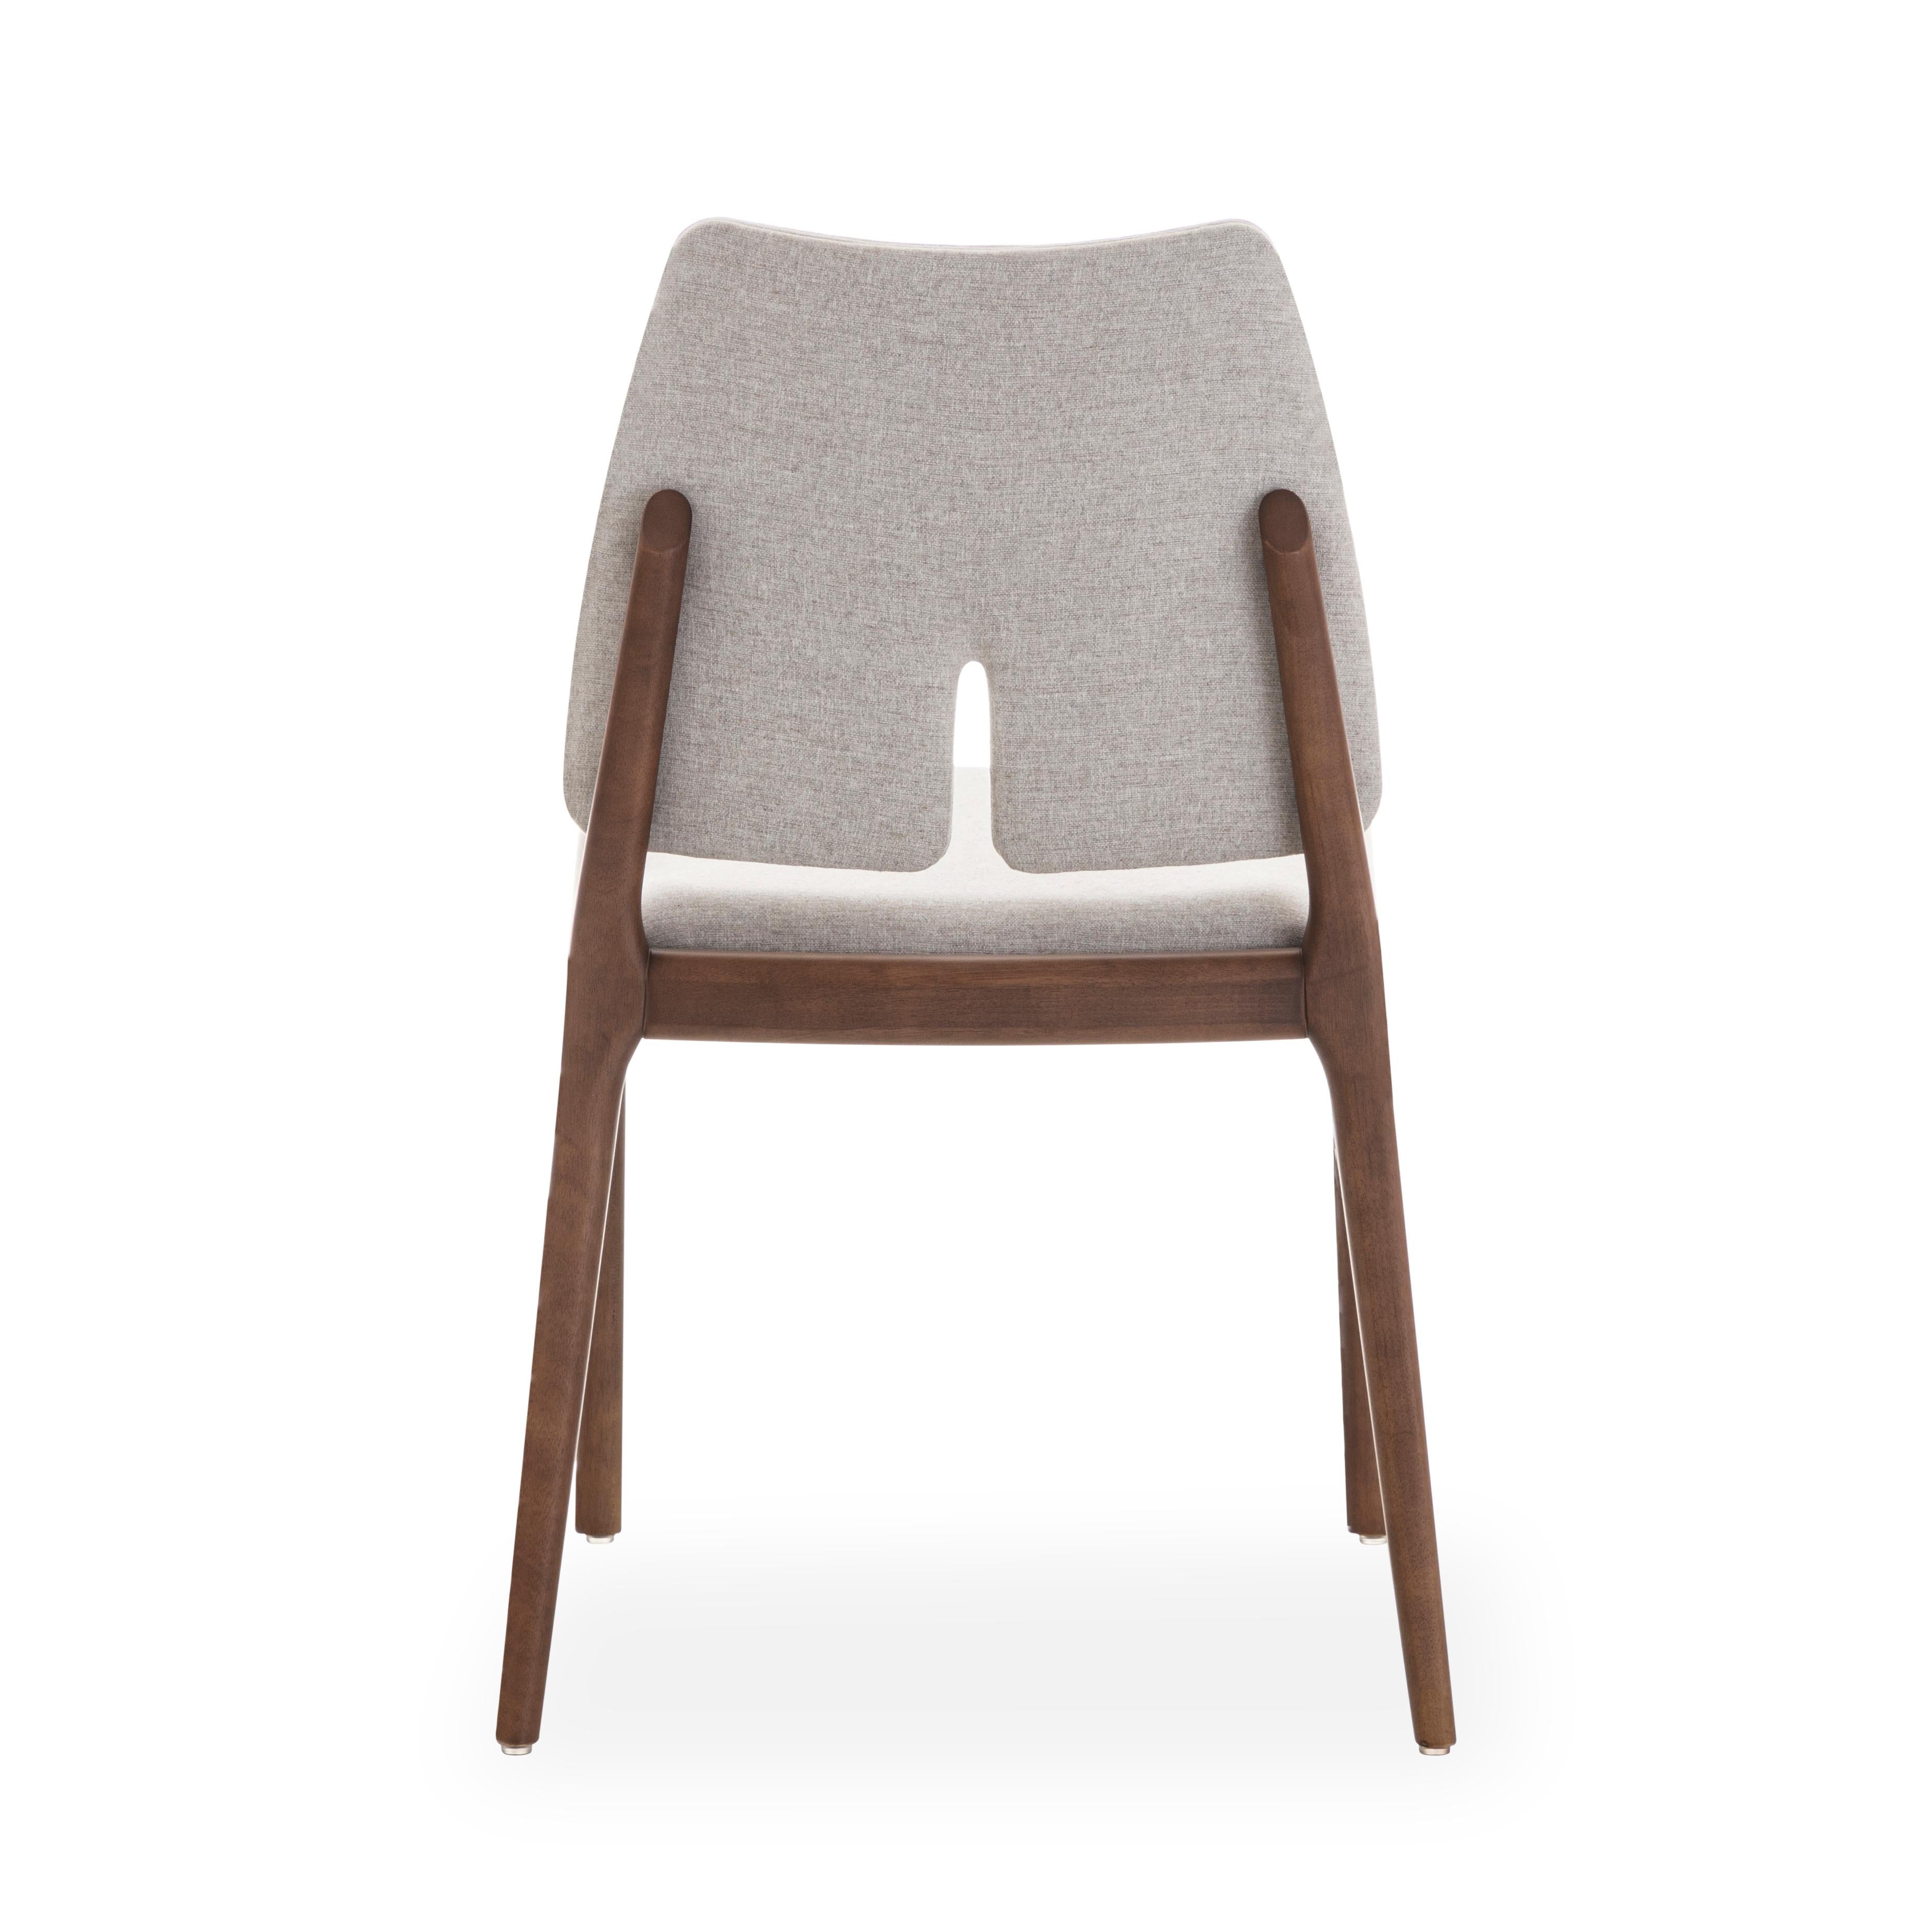 Brazilian Slit Dining Chair in Walnut Wood Finish and Light Beige Cotton Fabric, Set of 2 For Sale